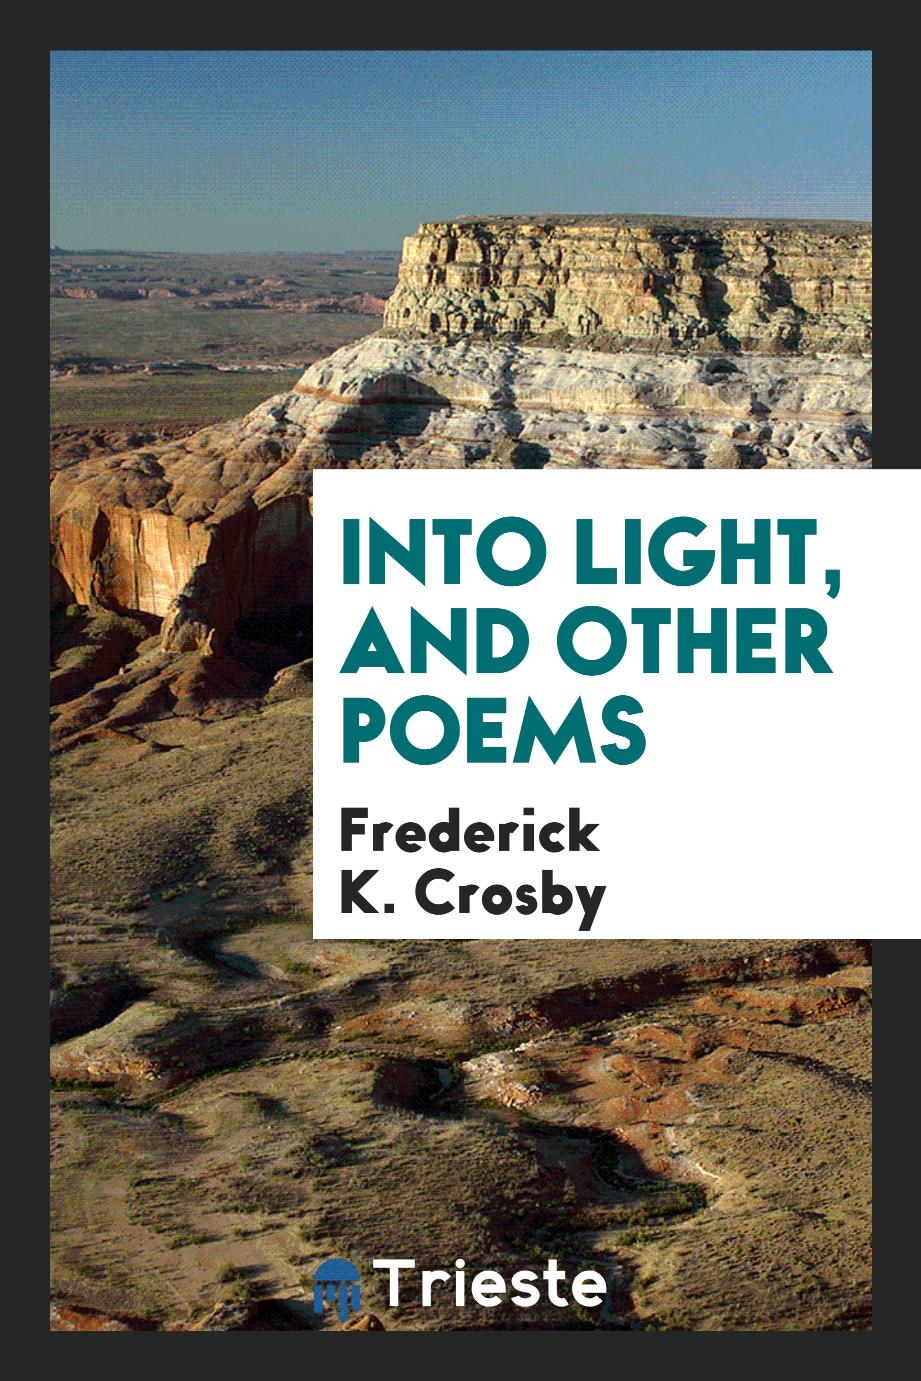 Into light, and other poems